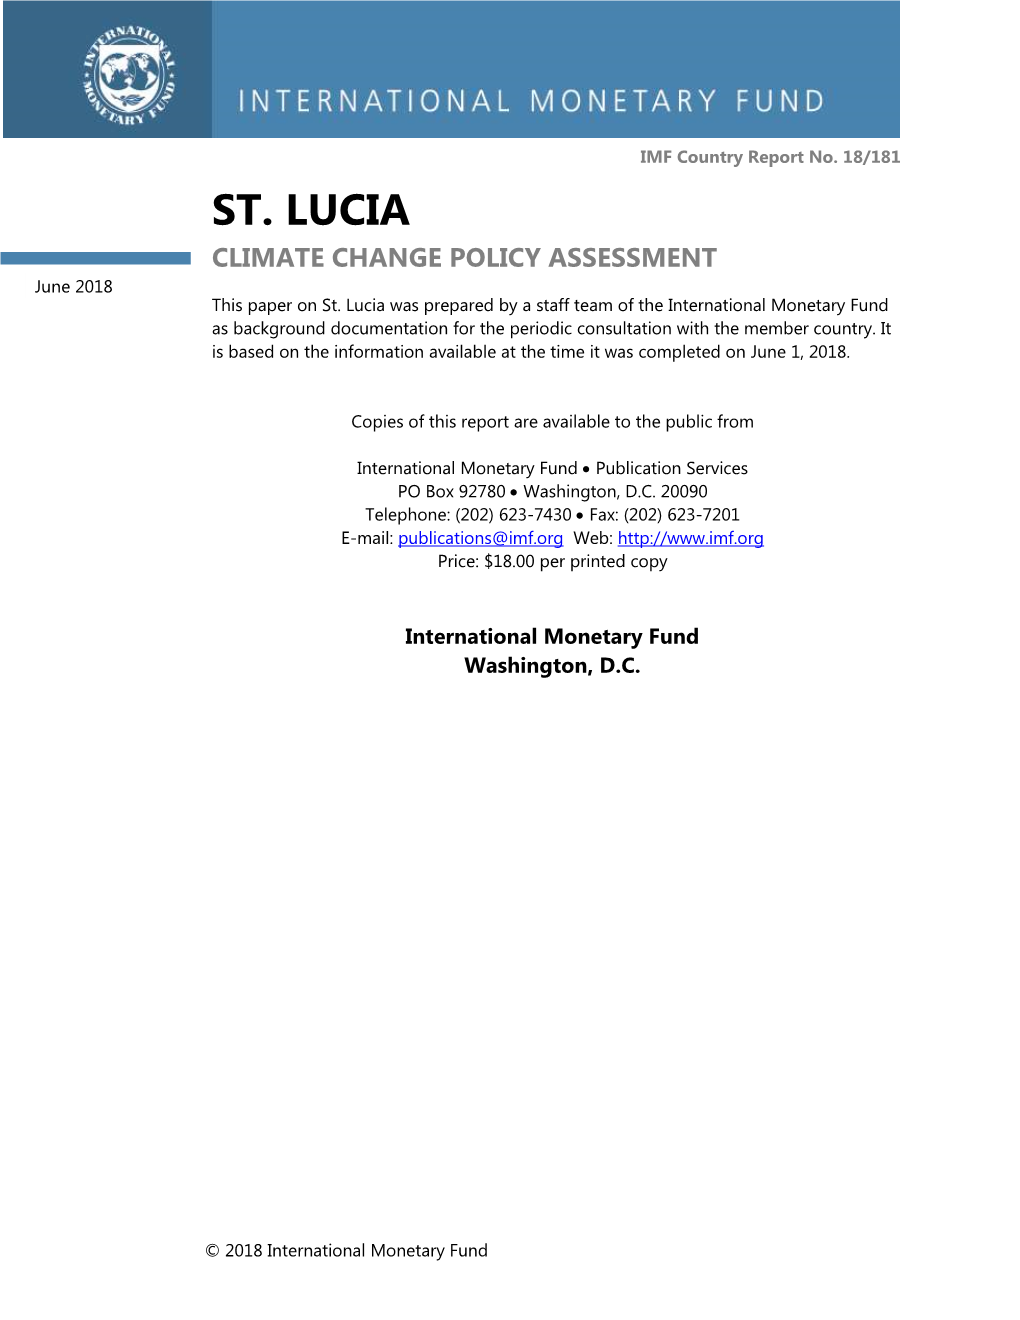 St. Lucia: Climate Change Policy Assessment